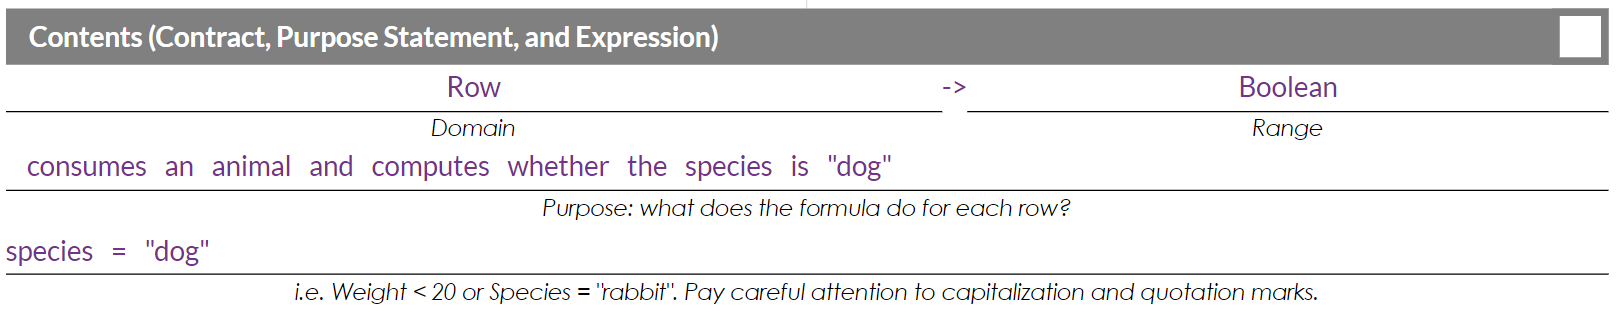 An image of the Contract (Row -> Boolean), Purpose Statement: consumes an animal and computes whether the species is "dog", Expression: Species = "dog